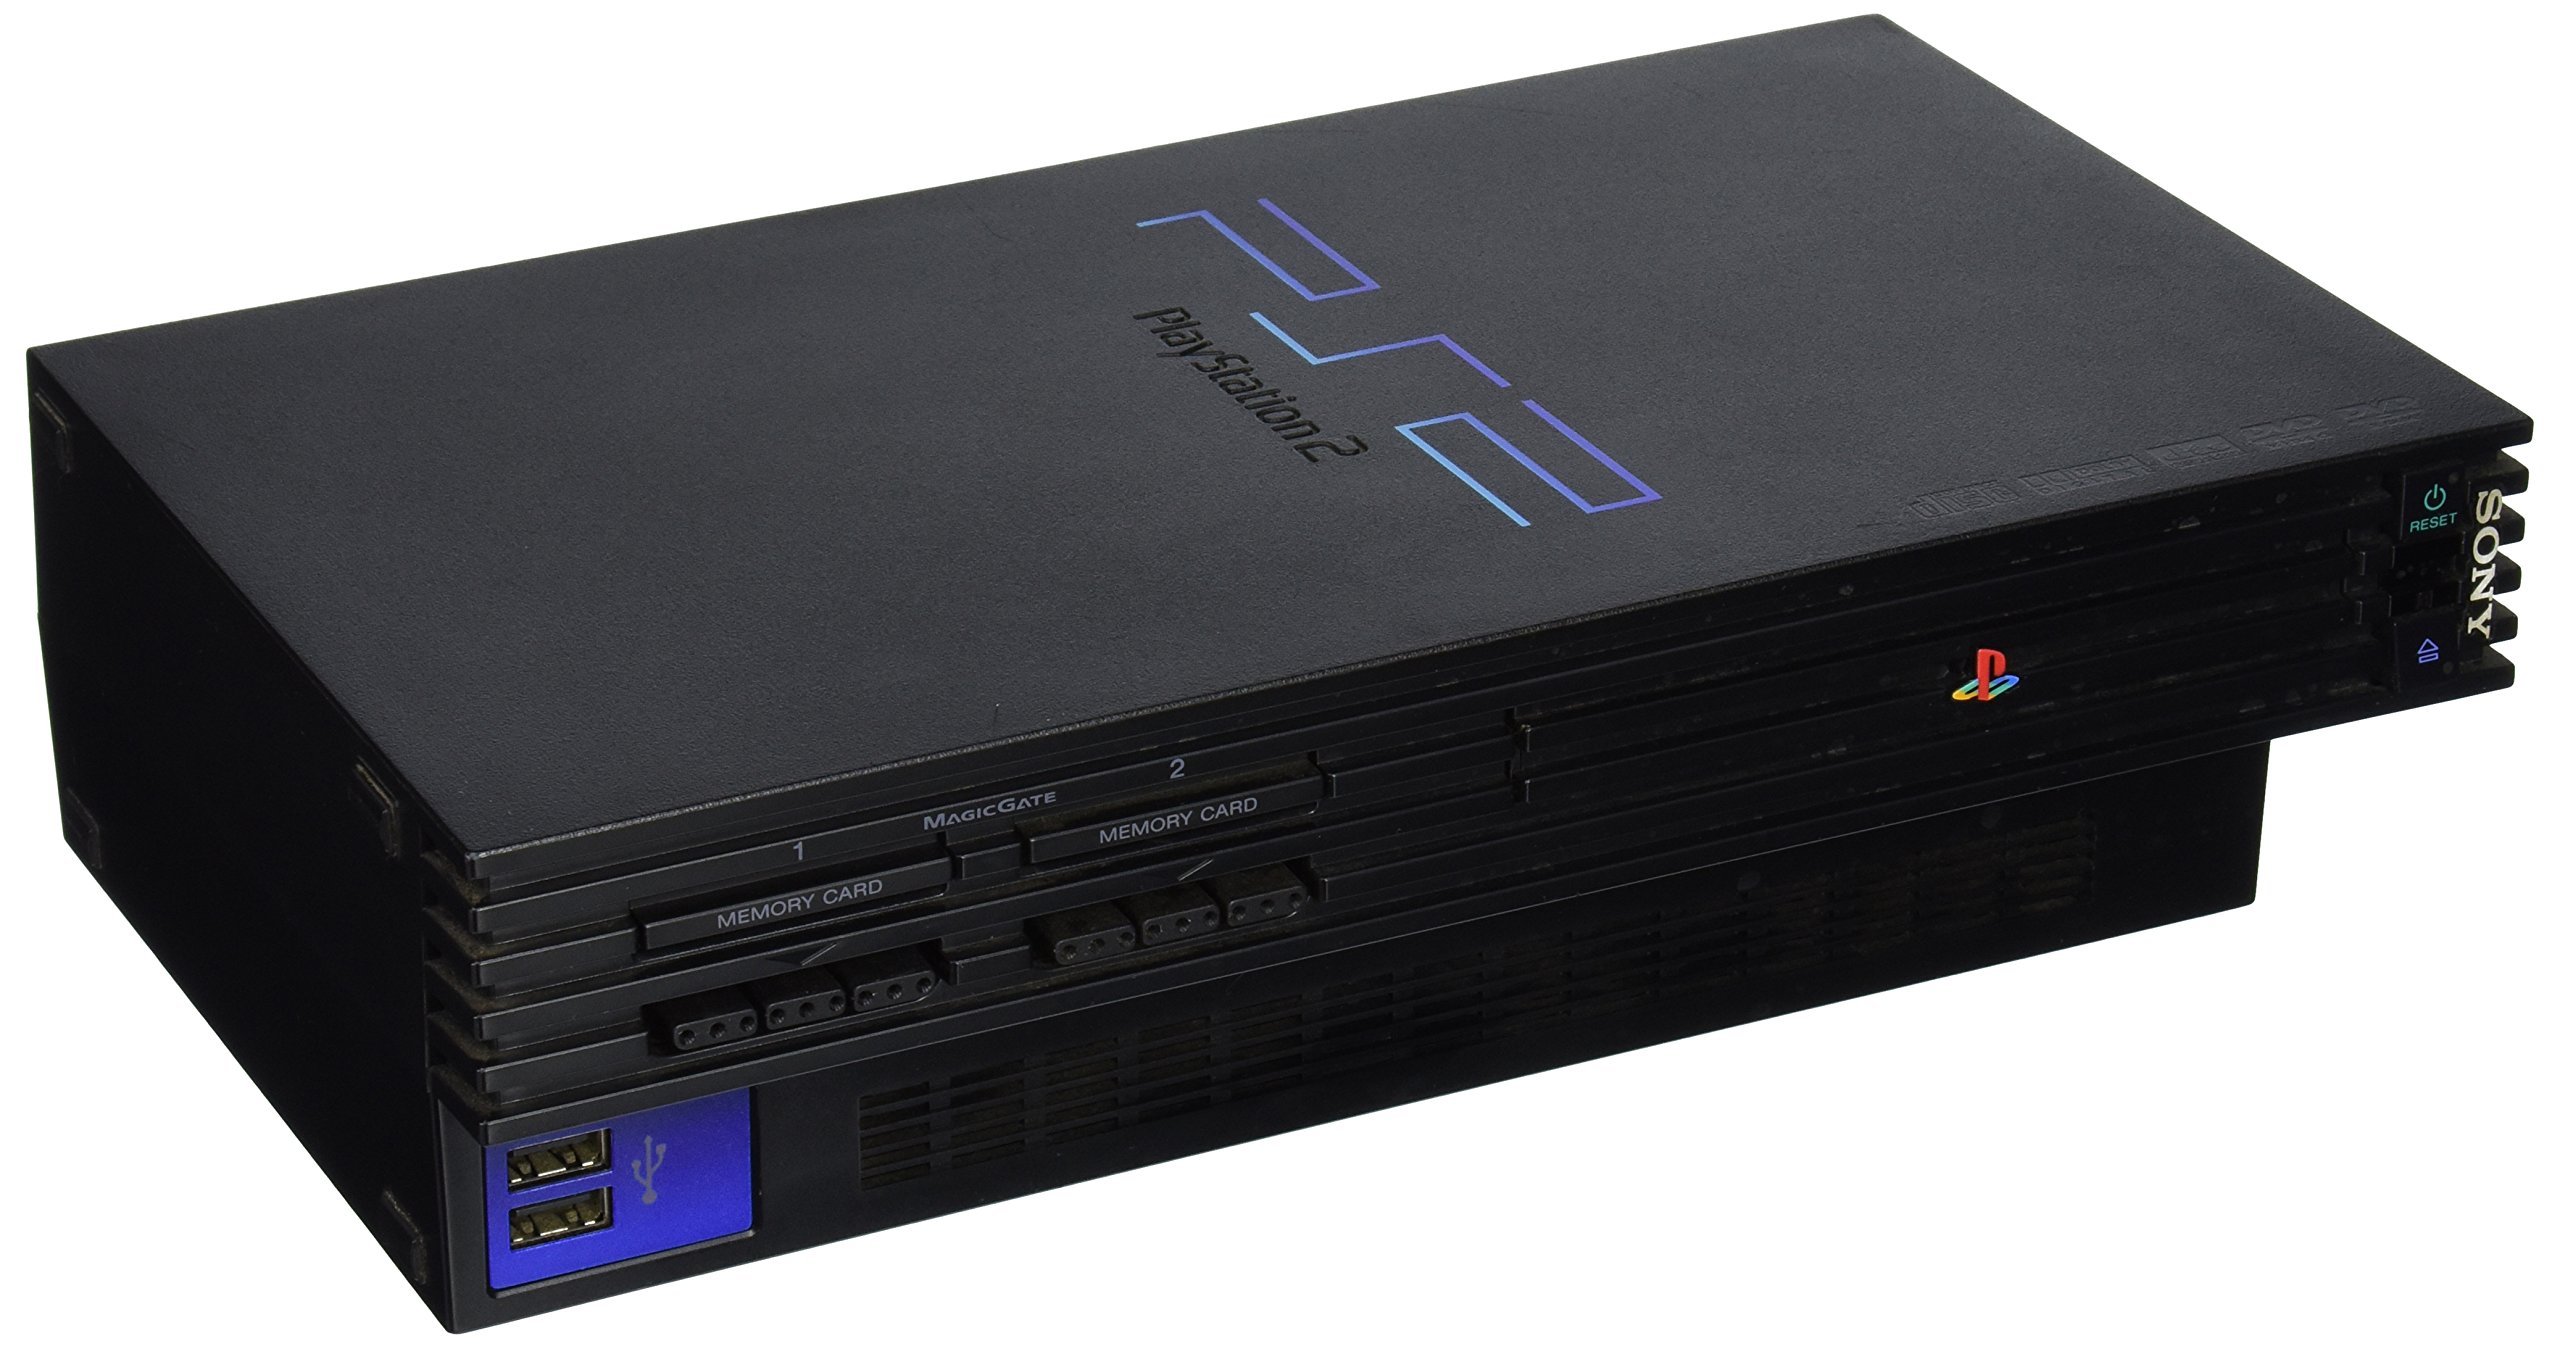 Where Can I Buy A Playstation 2